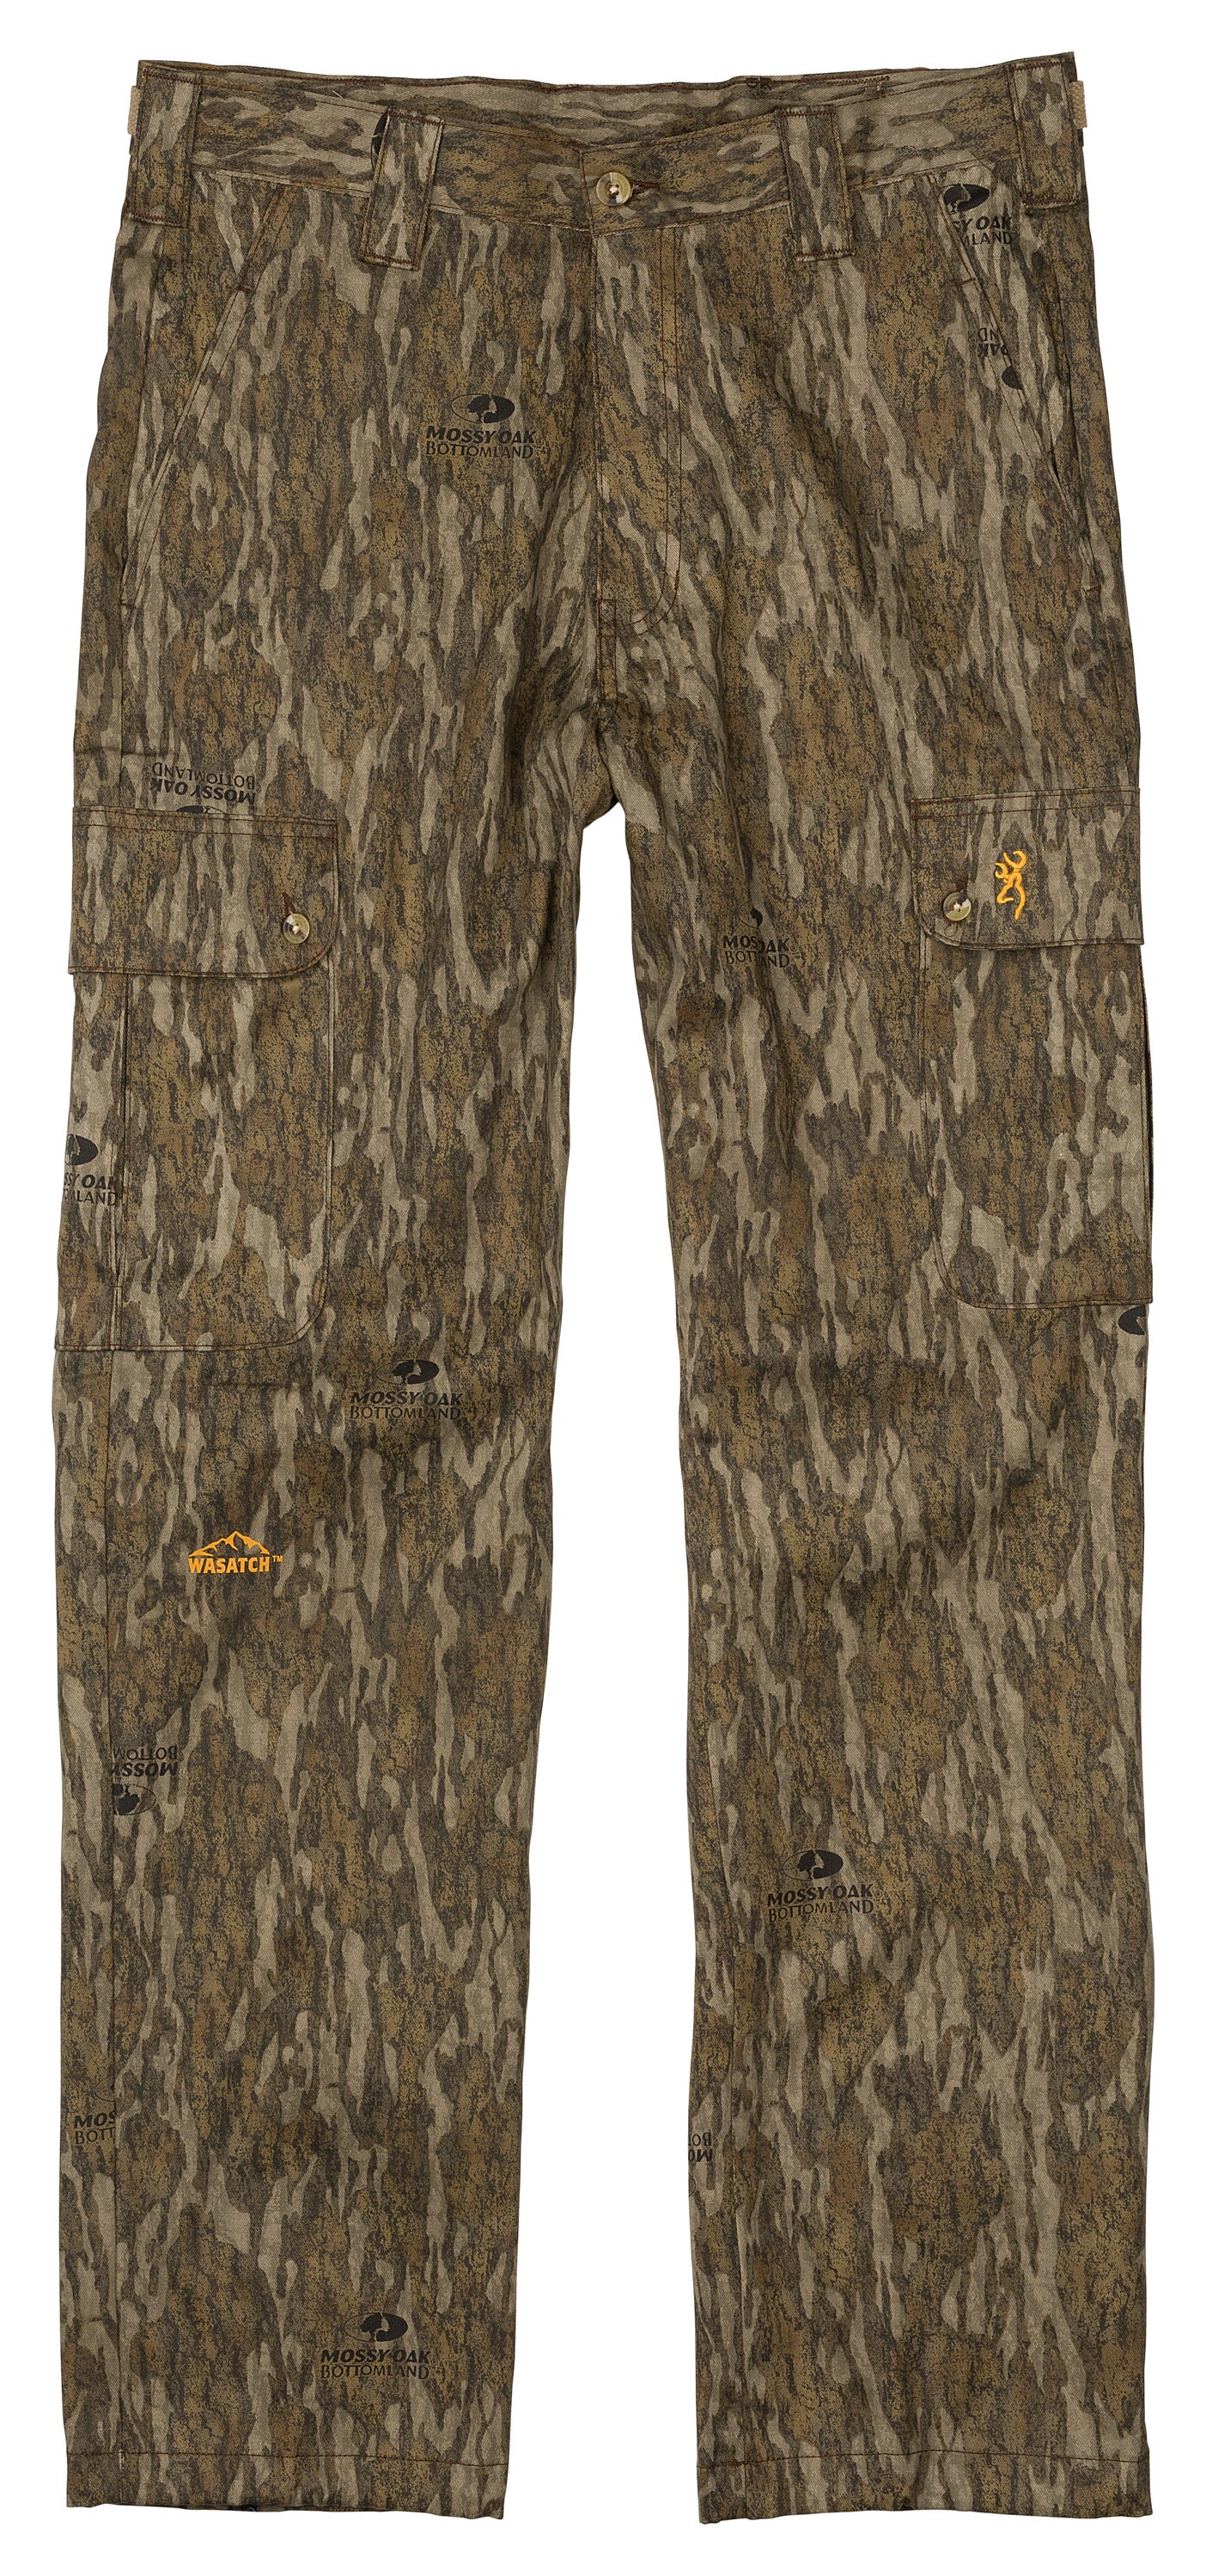 NEW BROWNING WASATCH CB PANTS MOSSY OAK SHADOW GRASS BLADES CAMO 